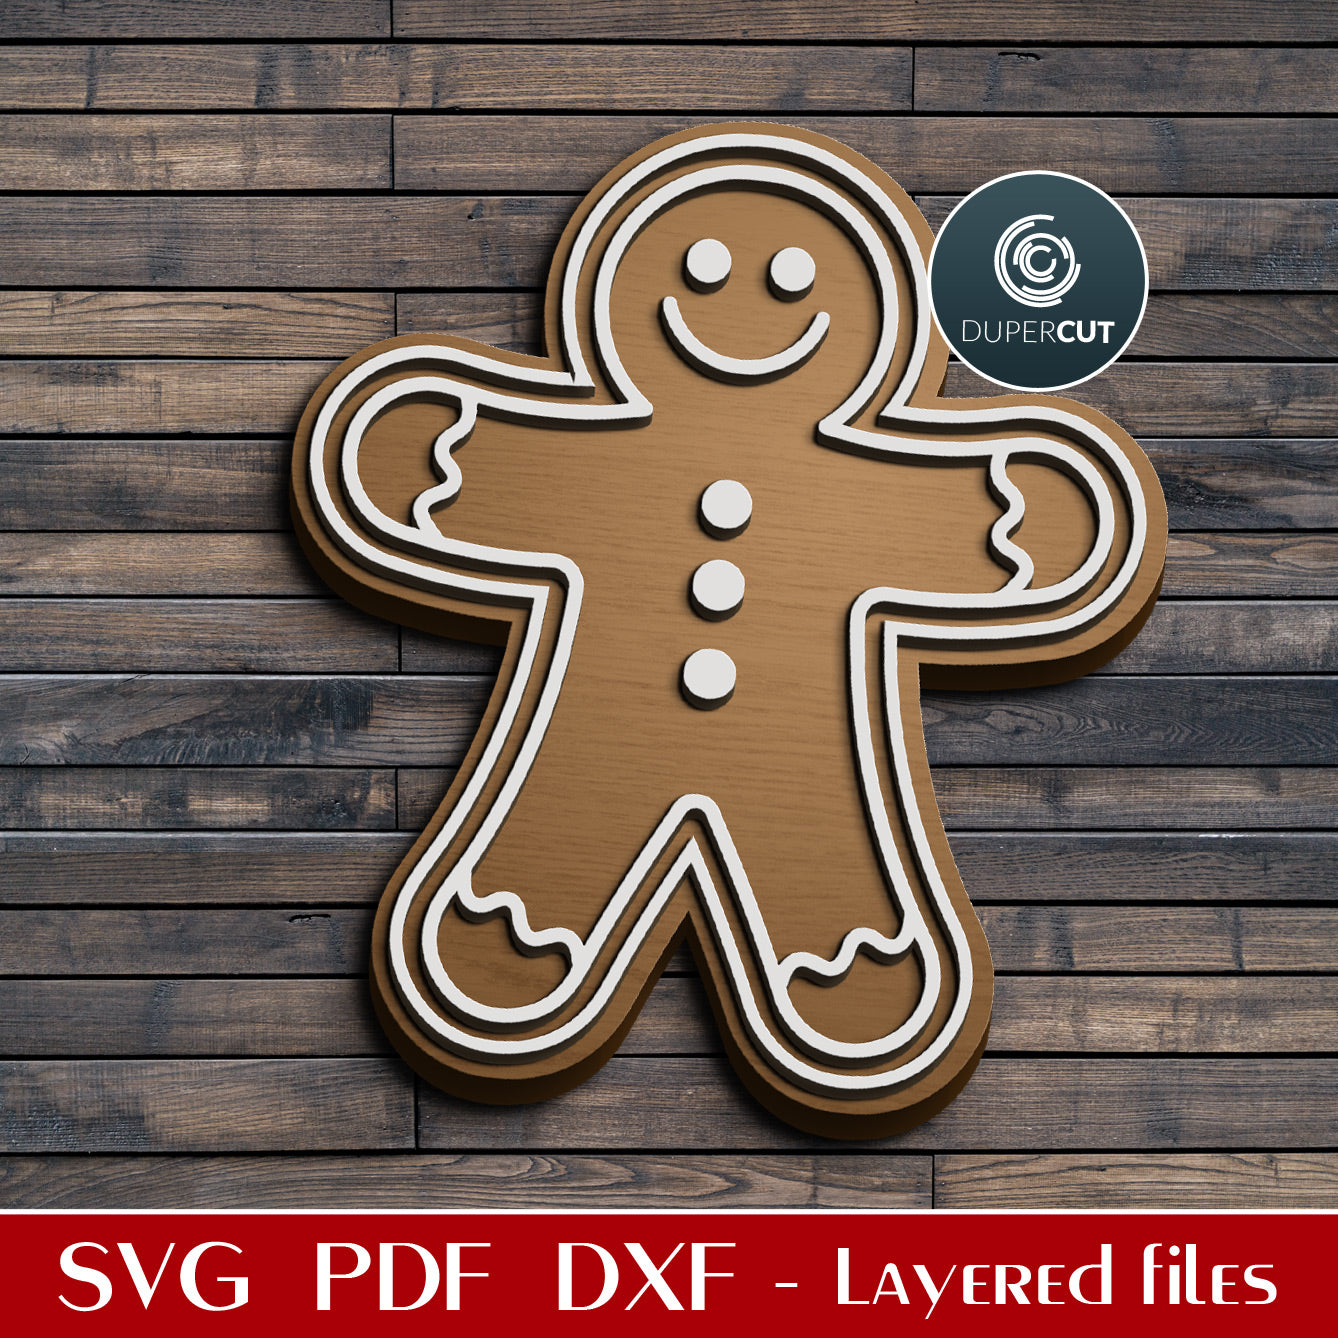 Gingerbread Man - Holiday decoration SVG PDF DXF layered cutting files for Glowforge, Cricut, Silhouette, CNC plasma machines by DuperCut